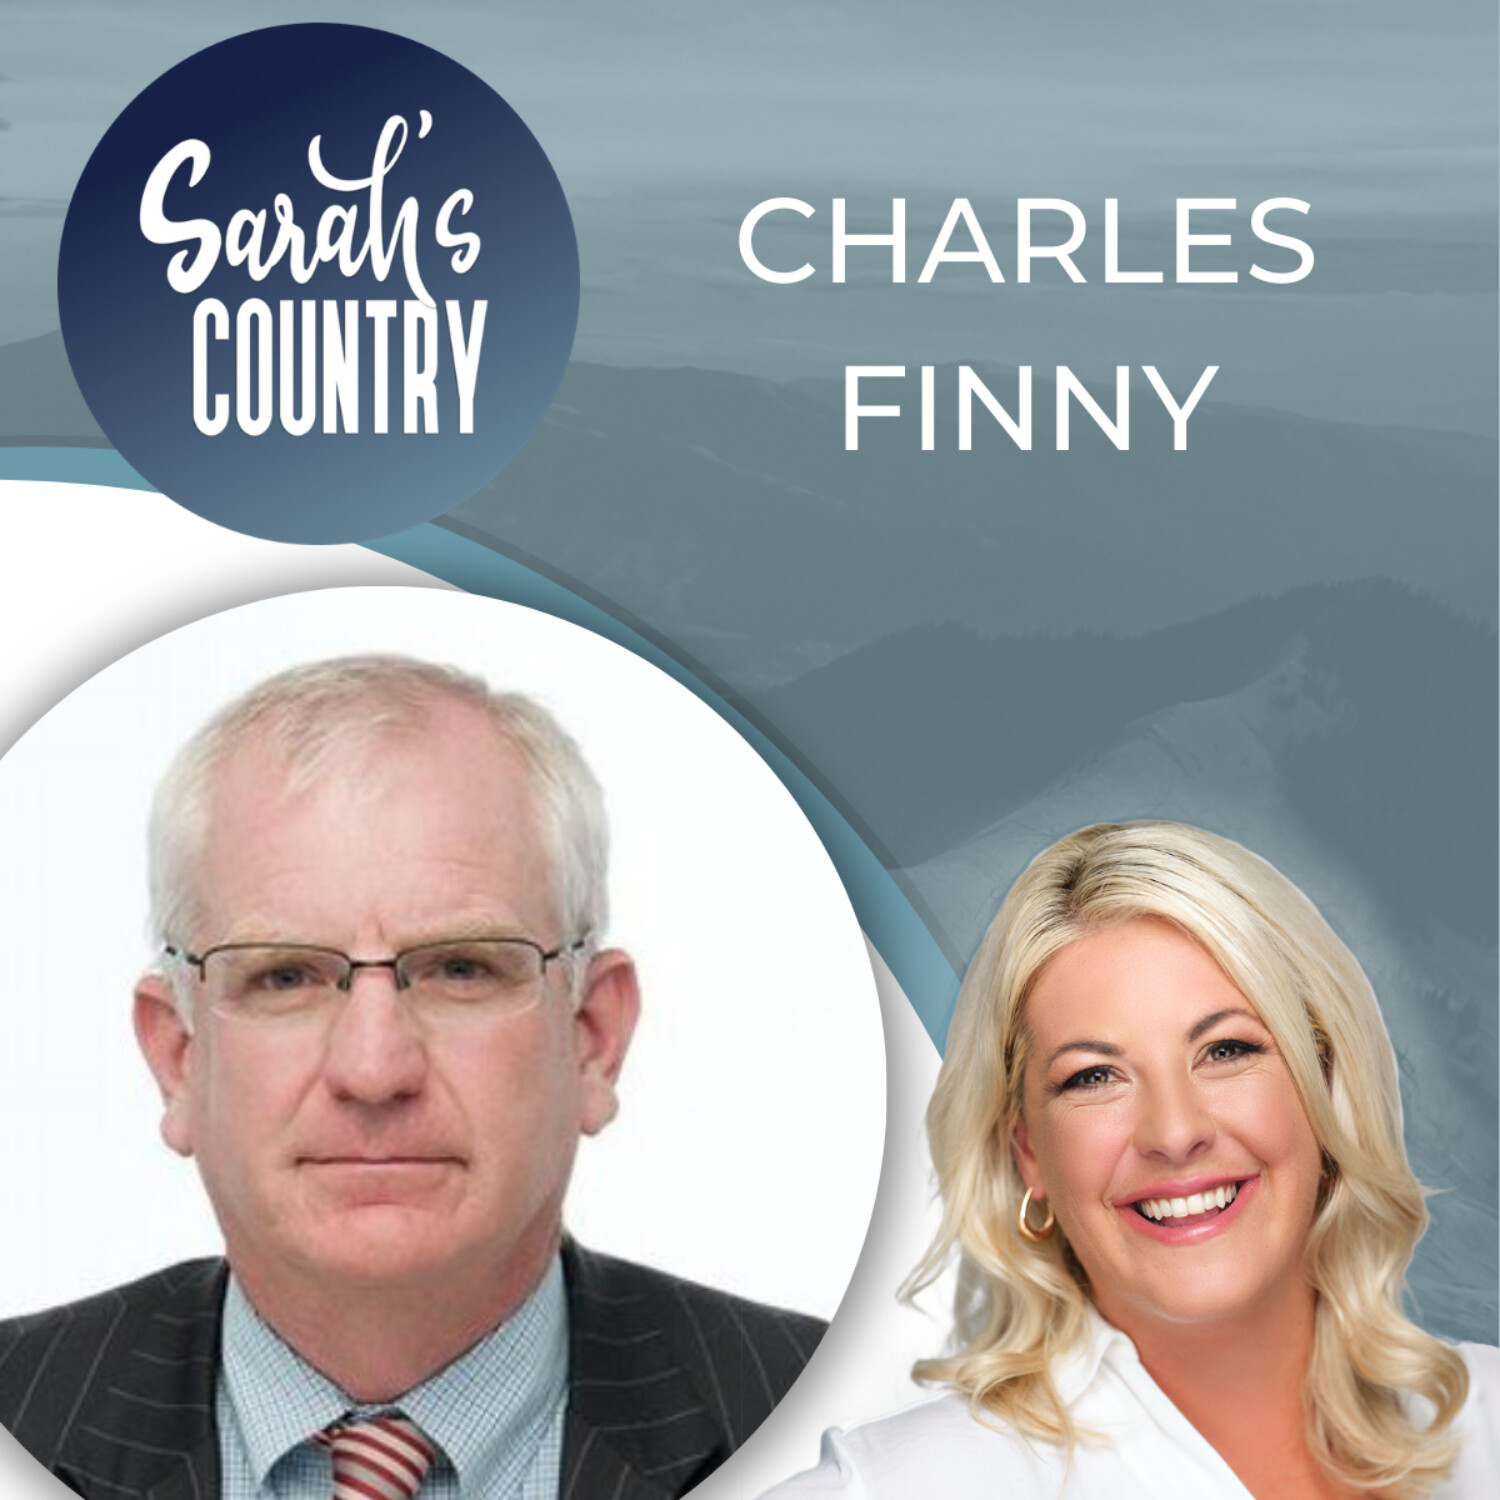 “Brexit frustrations mount” with Charles Finny